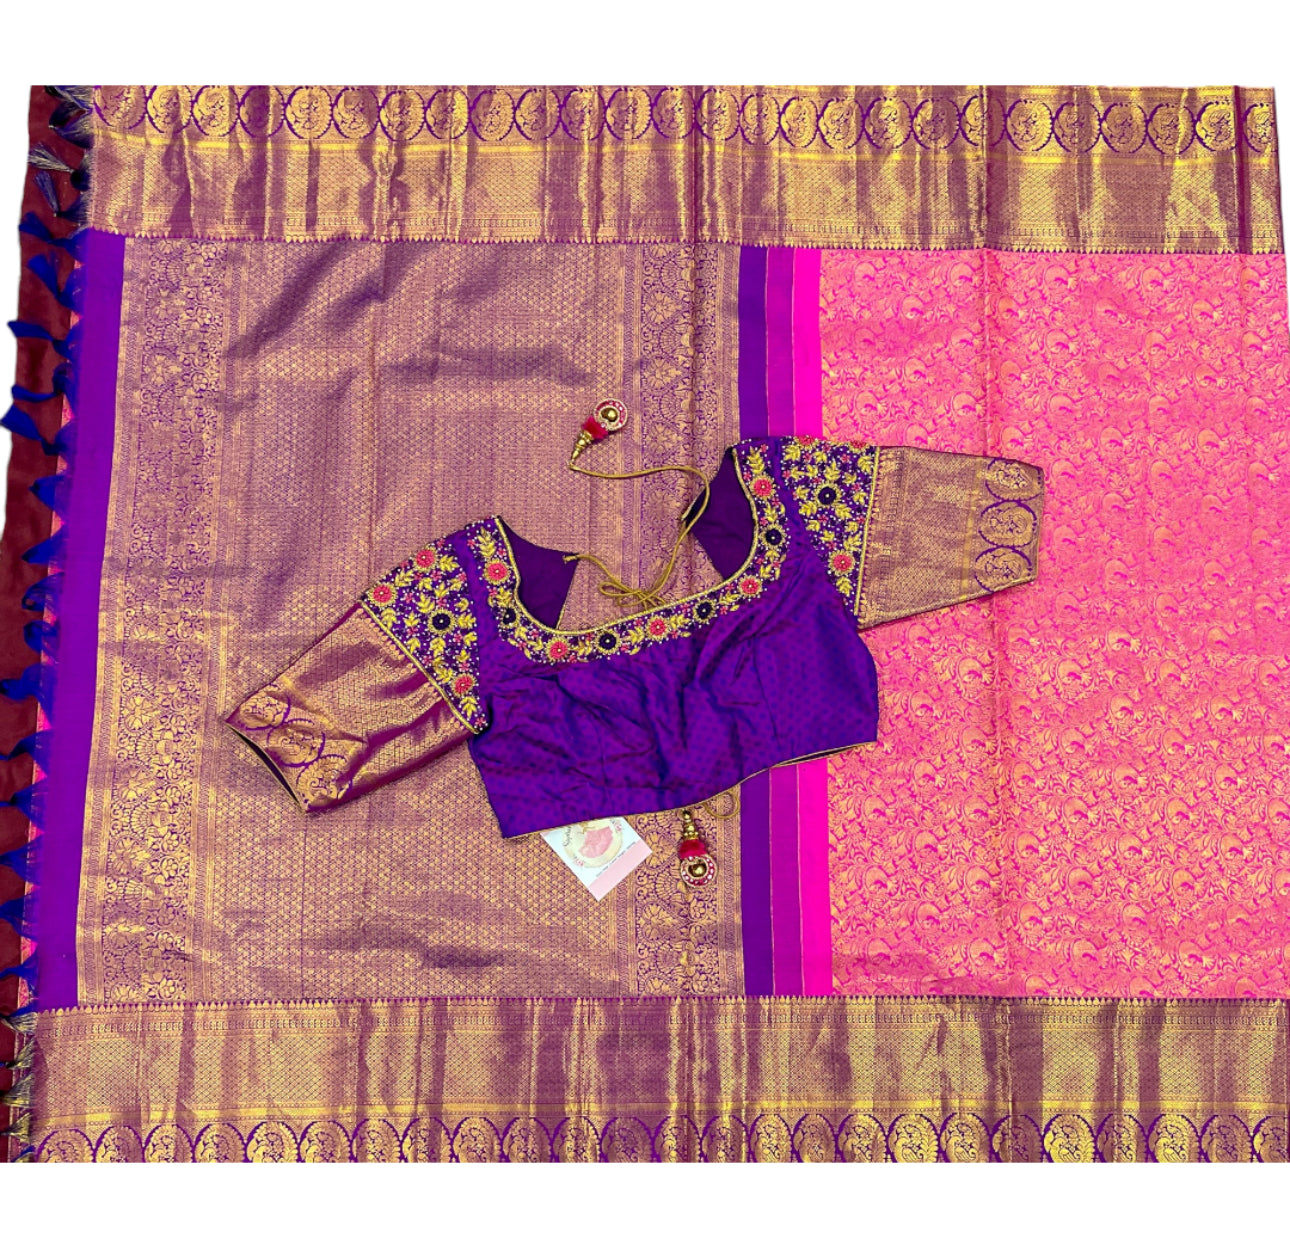 Elegance personified! 💖💜 Pure Kanjeevaram silk saree in Rani pink and Purple combo, certified with Silk Mark. Adorned with exquisite Maggam work blouse featuring Zardosi and knot work. Size 40 plus 3 in margin.